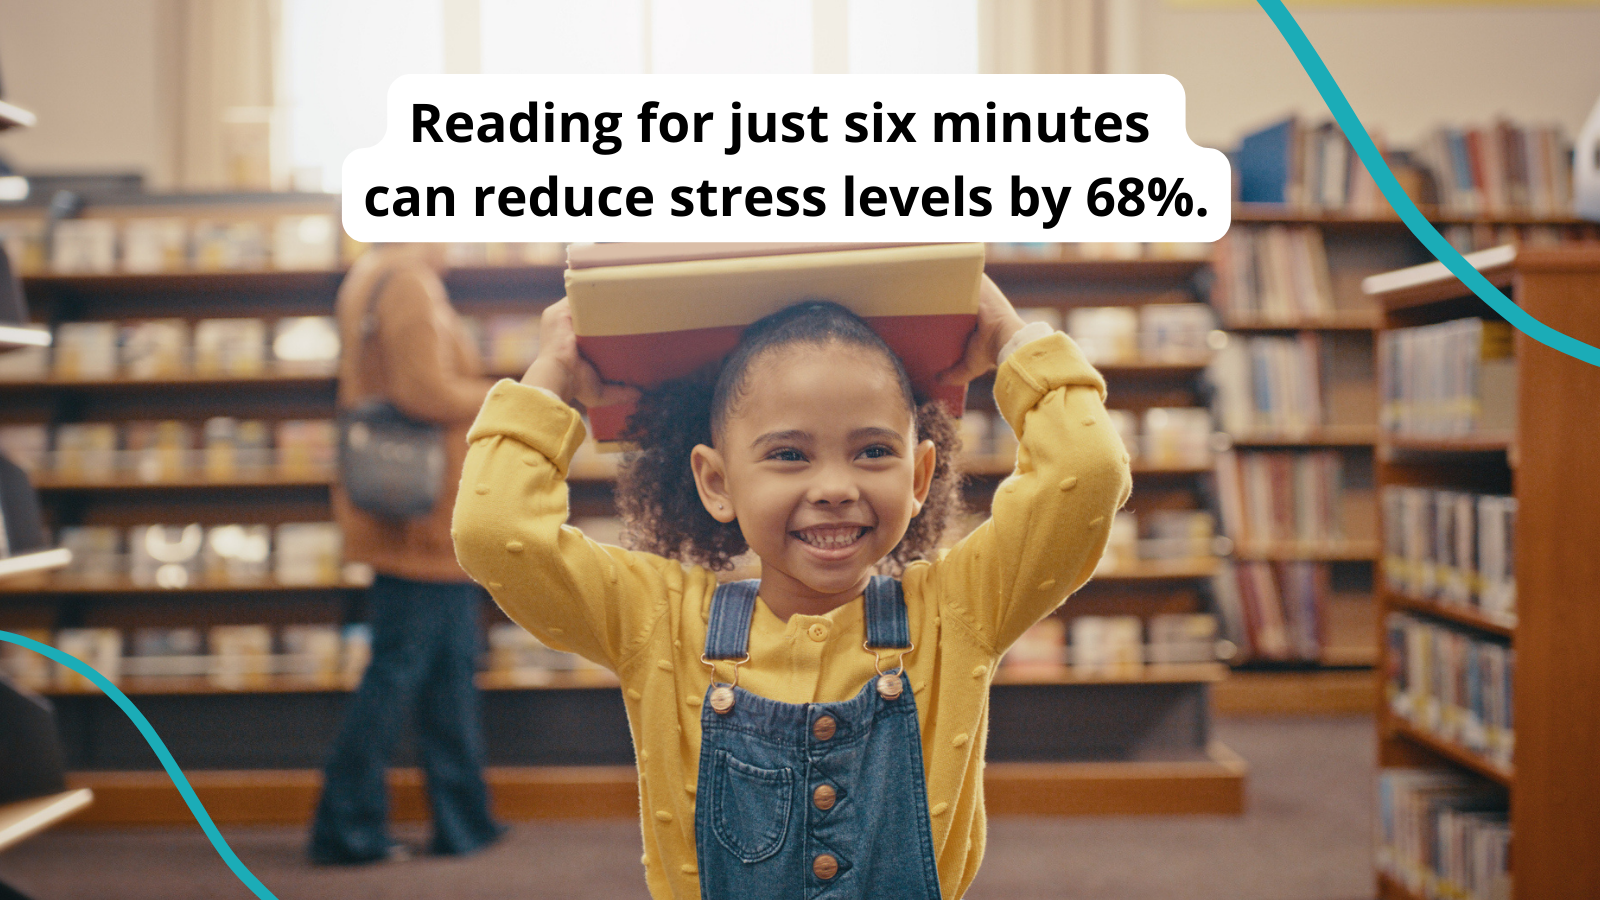 Young, smiling girl in library carrying books on her head. Text reads: Reading for just six minutes can reduce stress levels by 68%.